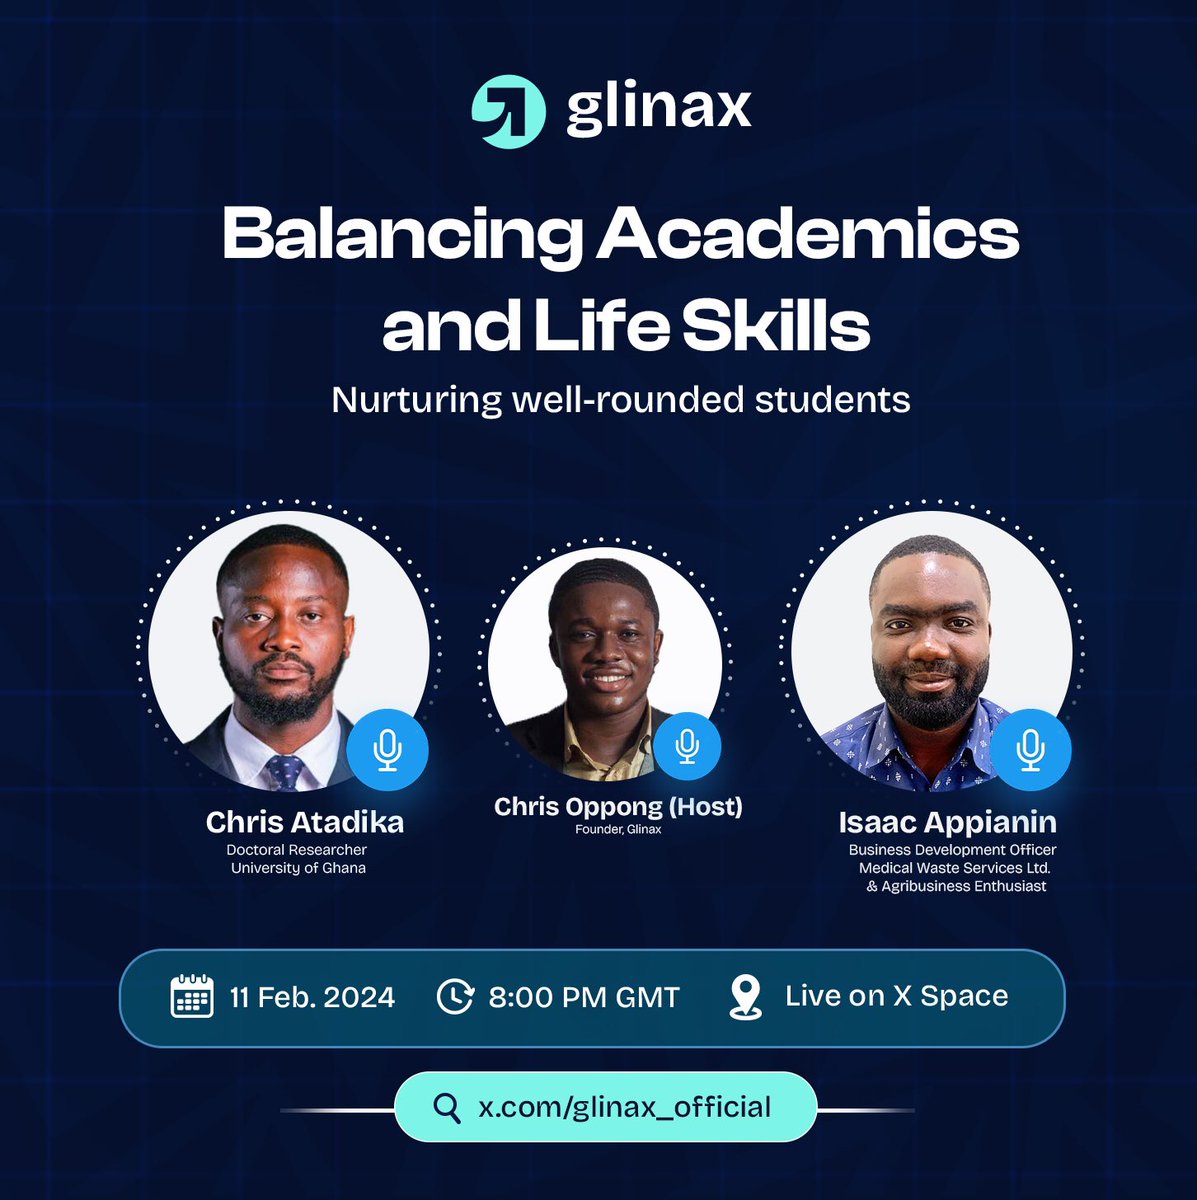 Excited to host @Glinax_Official talk show this Sunday at 8pm! Join us for insights from academia and industry experts on navigating your career path. Our esteemed speakers include @chrisatadika and @isaac_appianin Don't miss out – it's sure to be enlightening! 
#CareerInsights